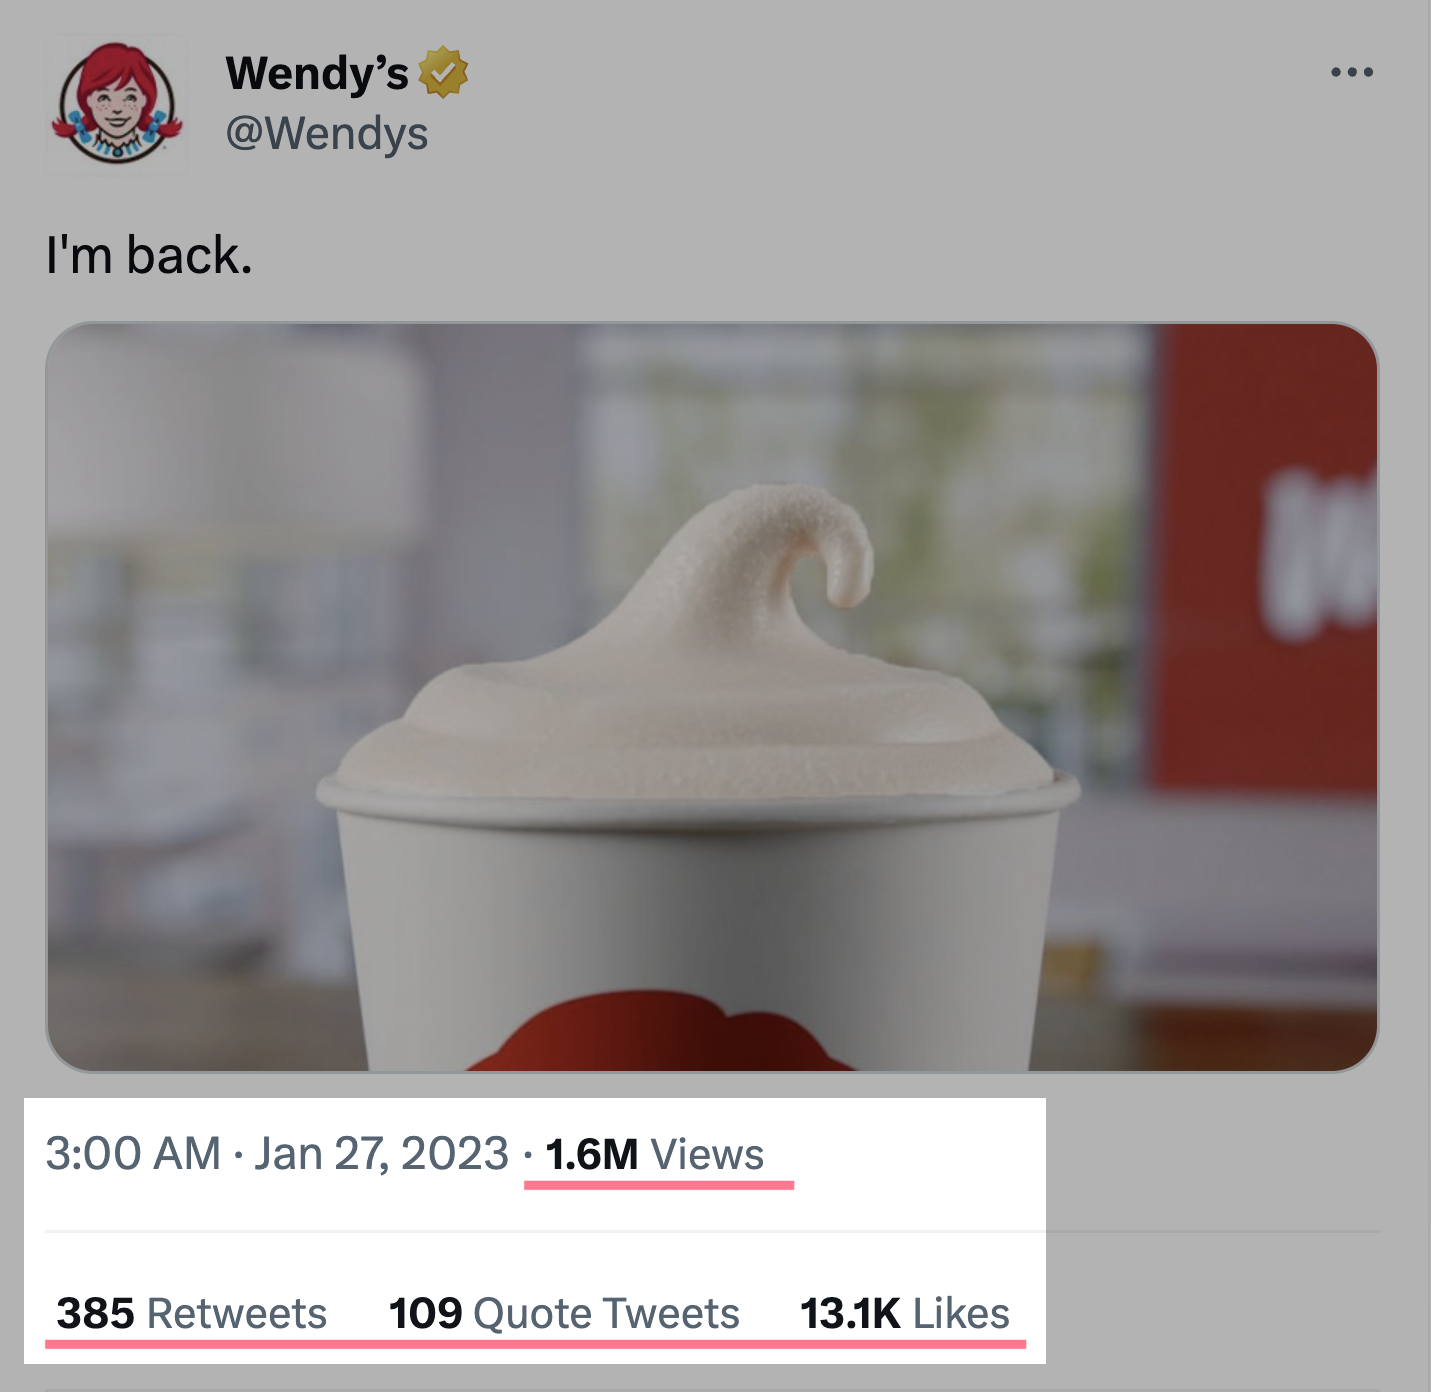 Wendy’s twitter engagement